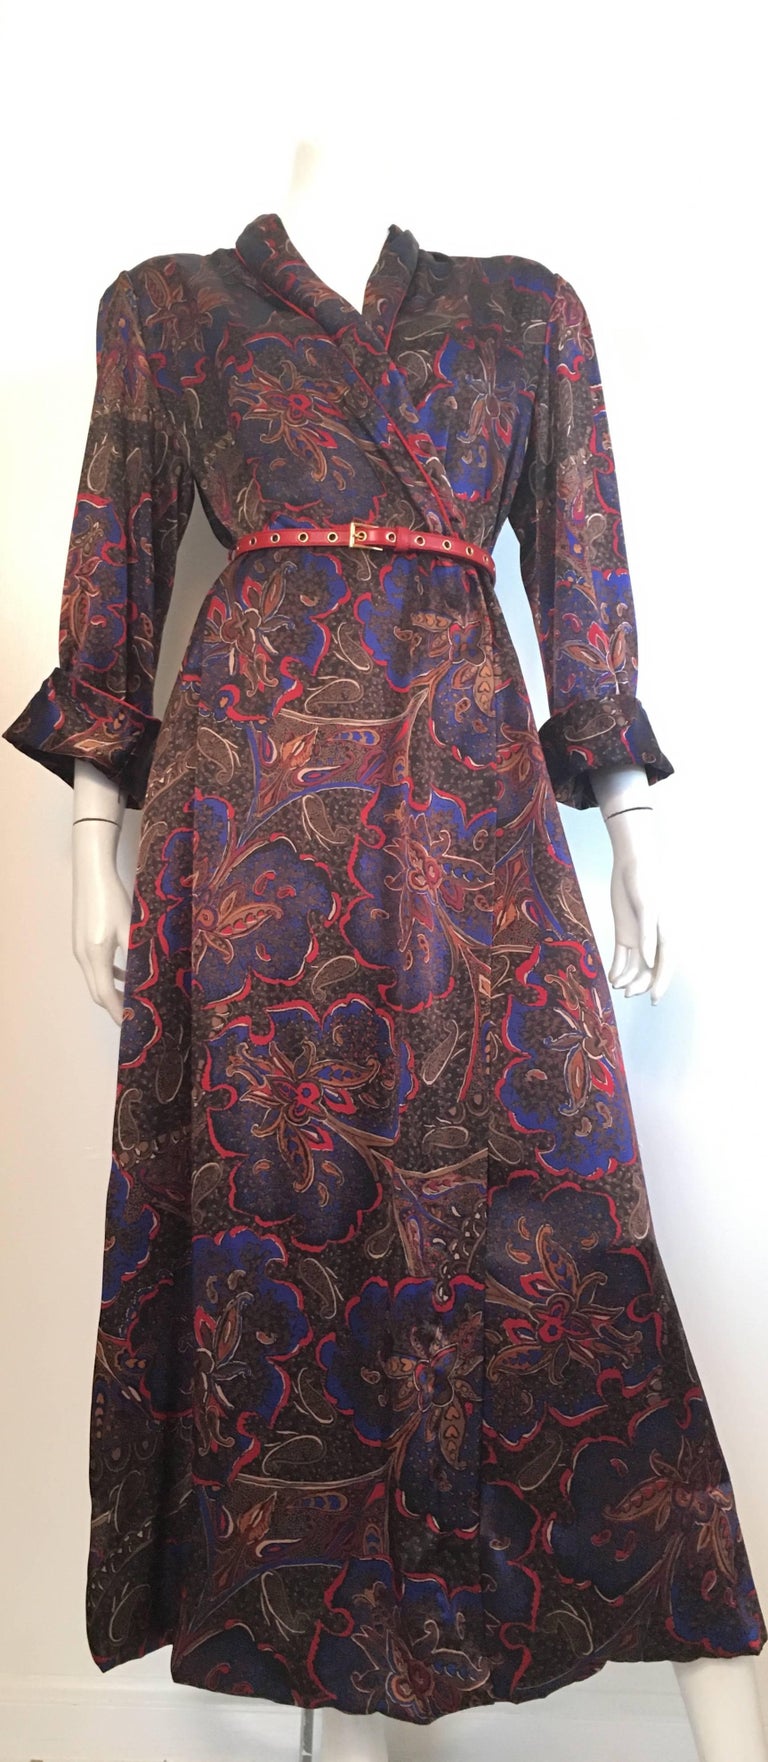 Bill Blass for Neiman Marcus 1980s Paisley Wrap Dress with Pockets Size ...